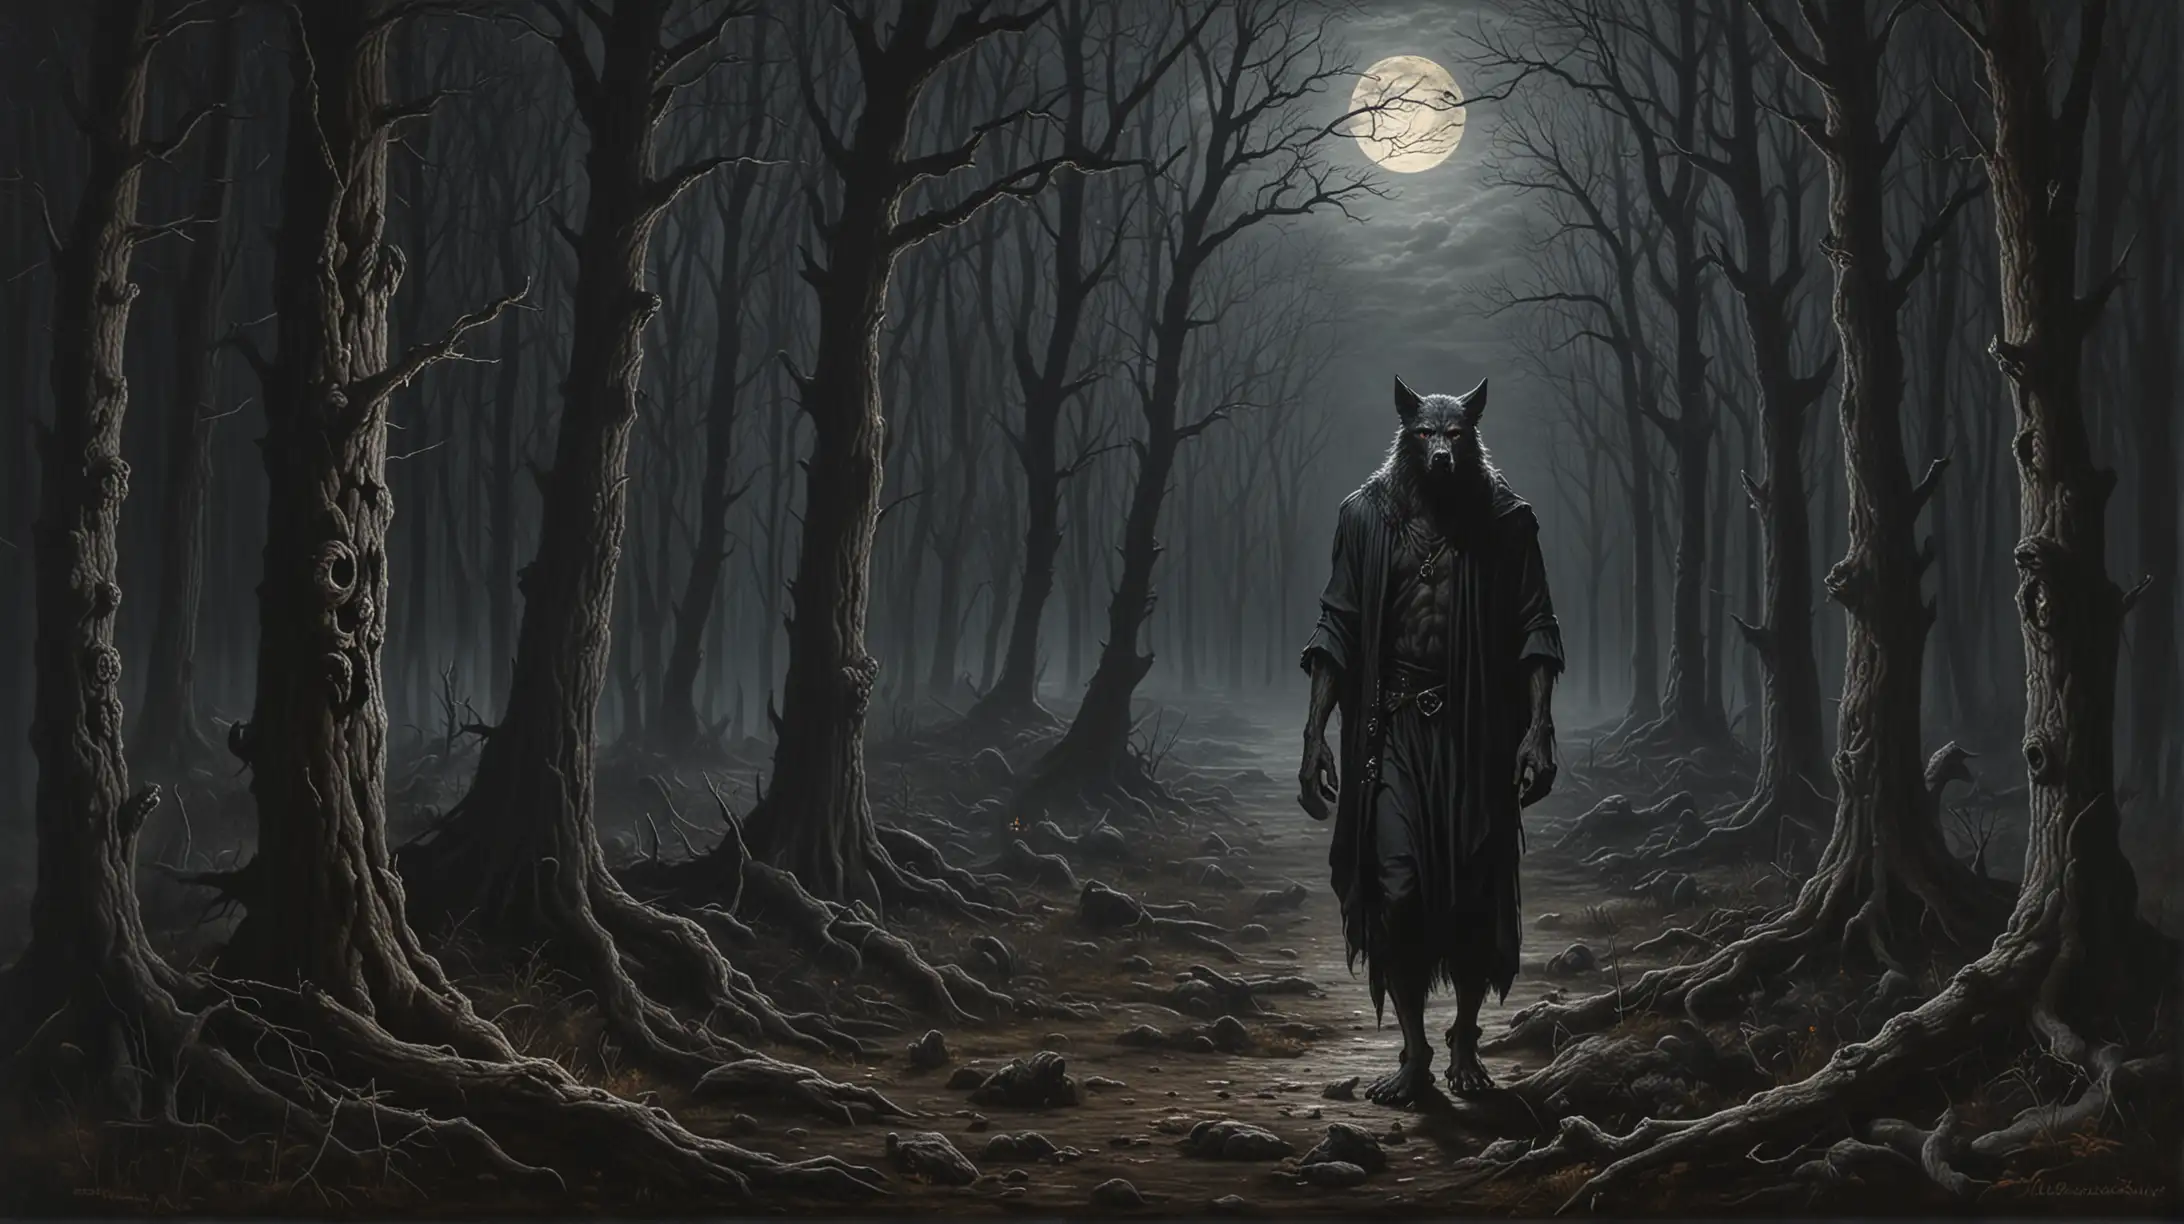 Dark Mystical Gothic, Rapahael Santi, old master oil painting of the lonley Werewolf, and dark forest and moon, horror atmosfphere

